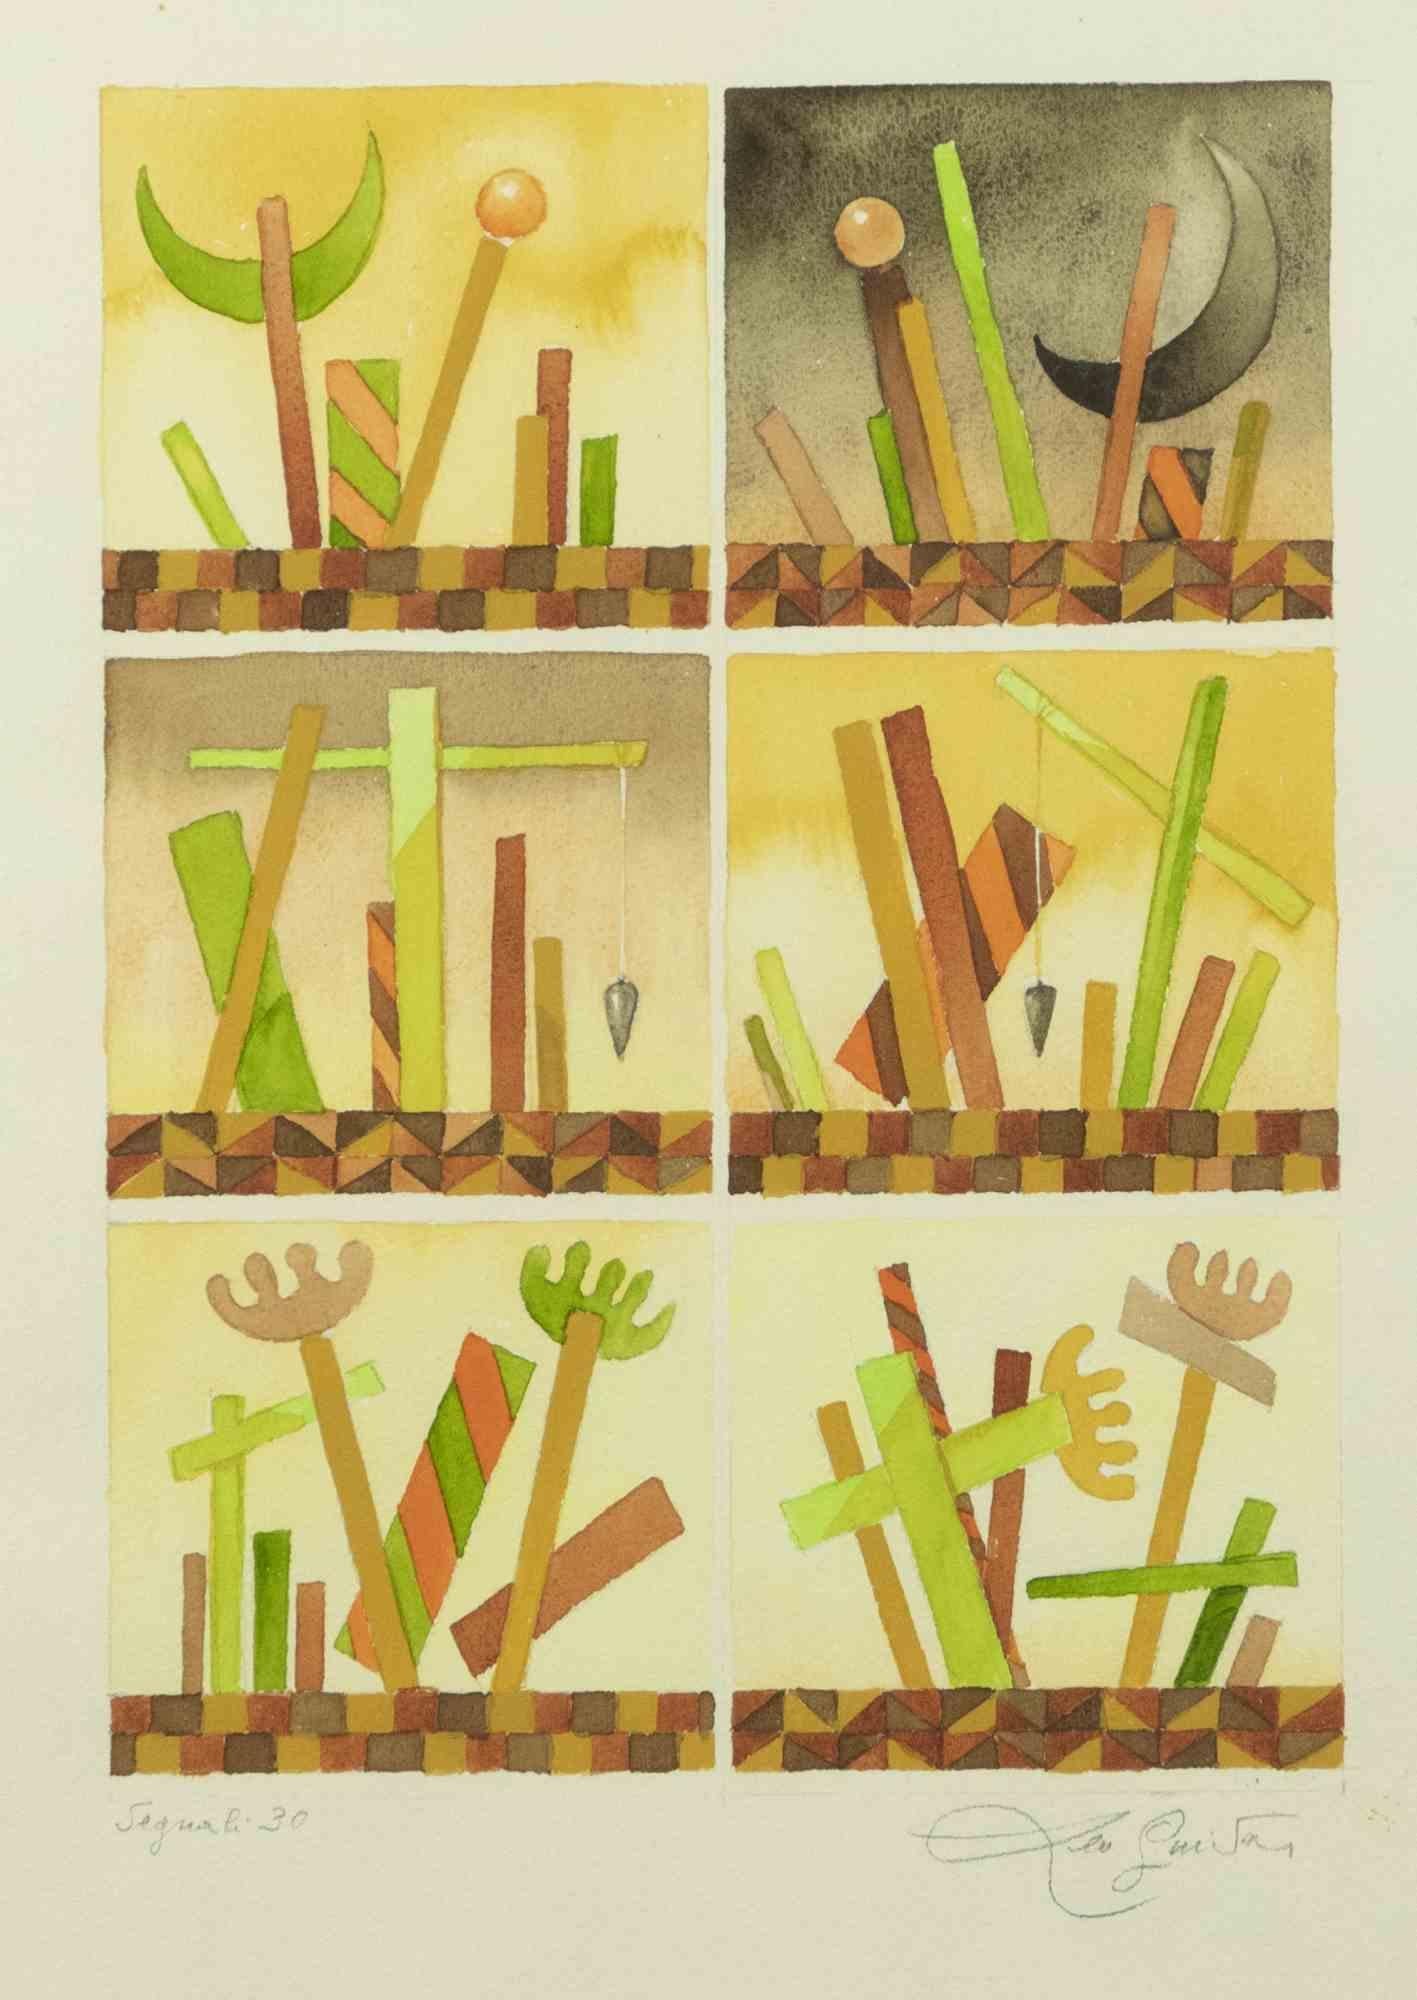 Signal 30 is a contemporary artwork realized by Leo Guida in 1970s
Mixed colored watercolor on paper.

Hand signed, titled on the lower margin

Includes frame: 63.5 x 49 cm

Leo Guida  (1992 - 2017). Sensitive to current issues, artistic movements